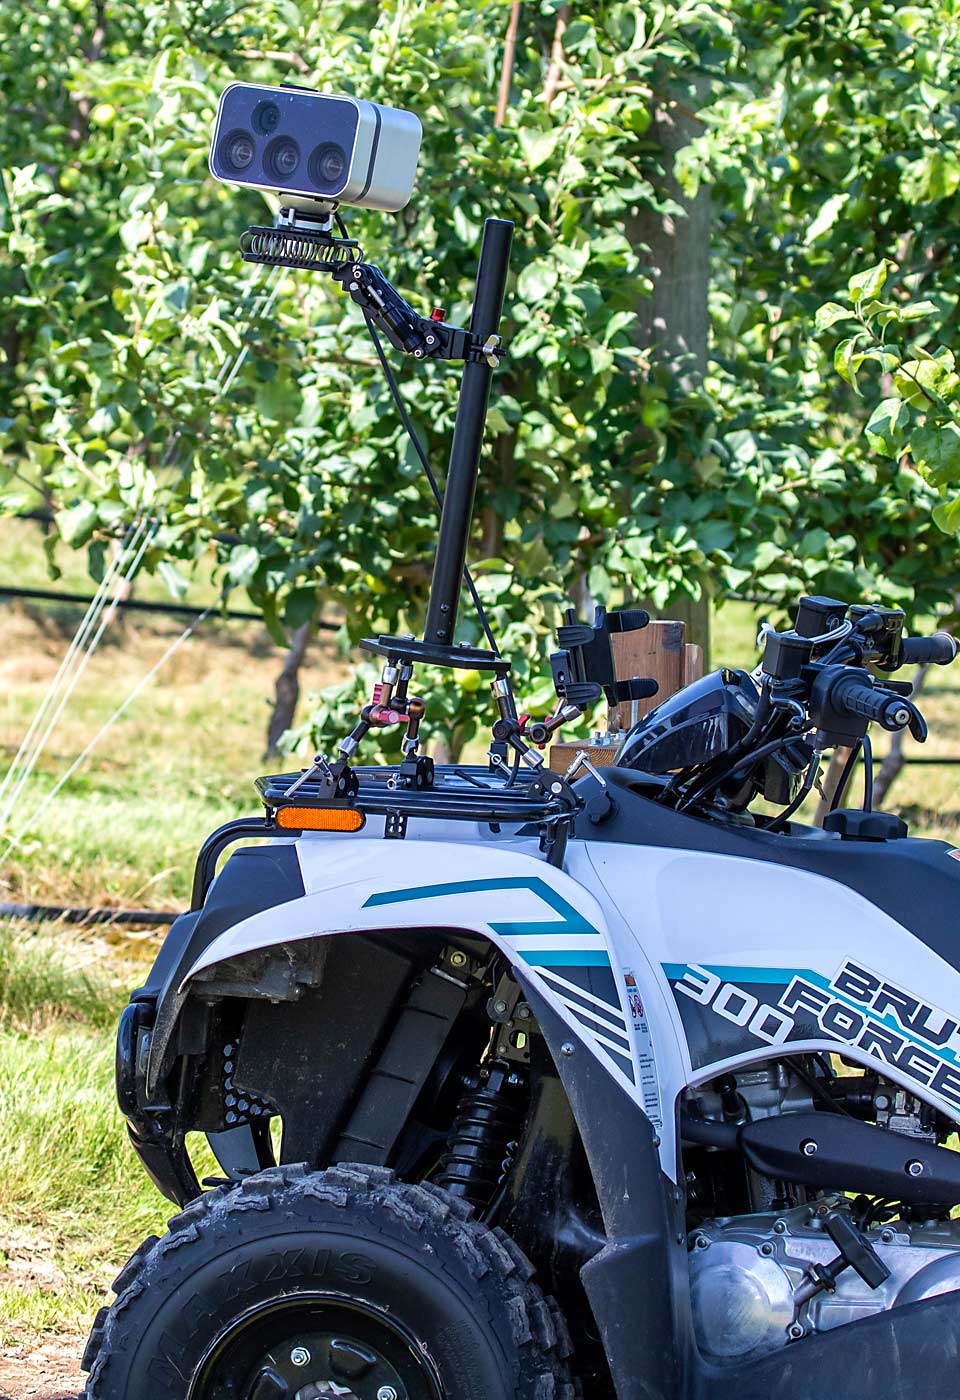 Vivid Machines’ Vivid-X Vision System, on display at Crisp Growers in Nova Scotia, attaches to ATVs and other vehicles and helps growers with precision crop load management. (TJ Mullinax/Good Fruit Grower)